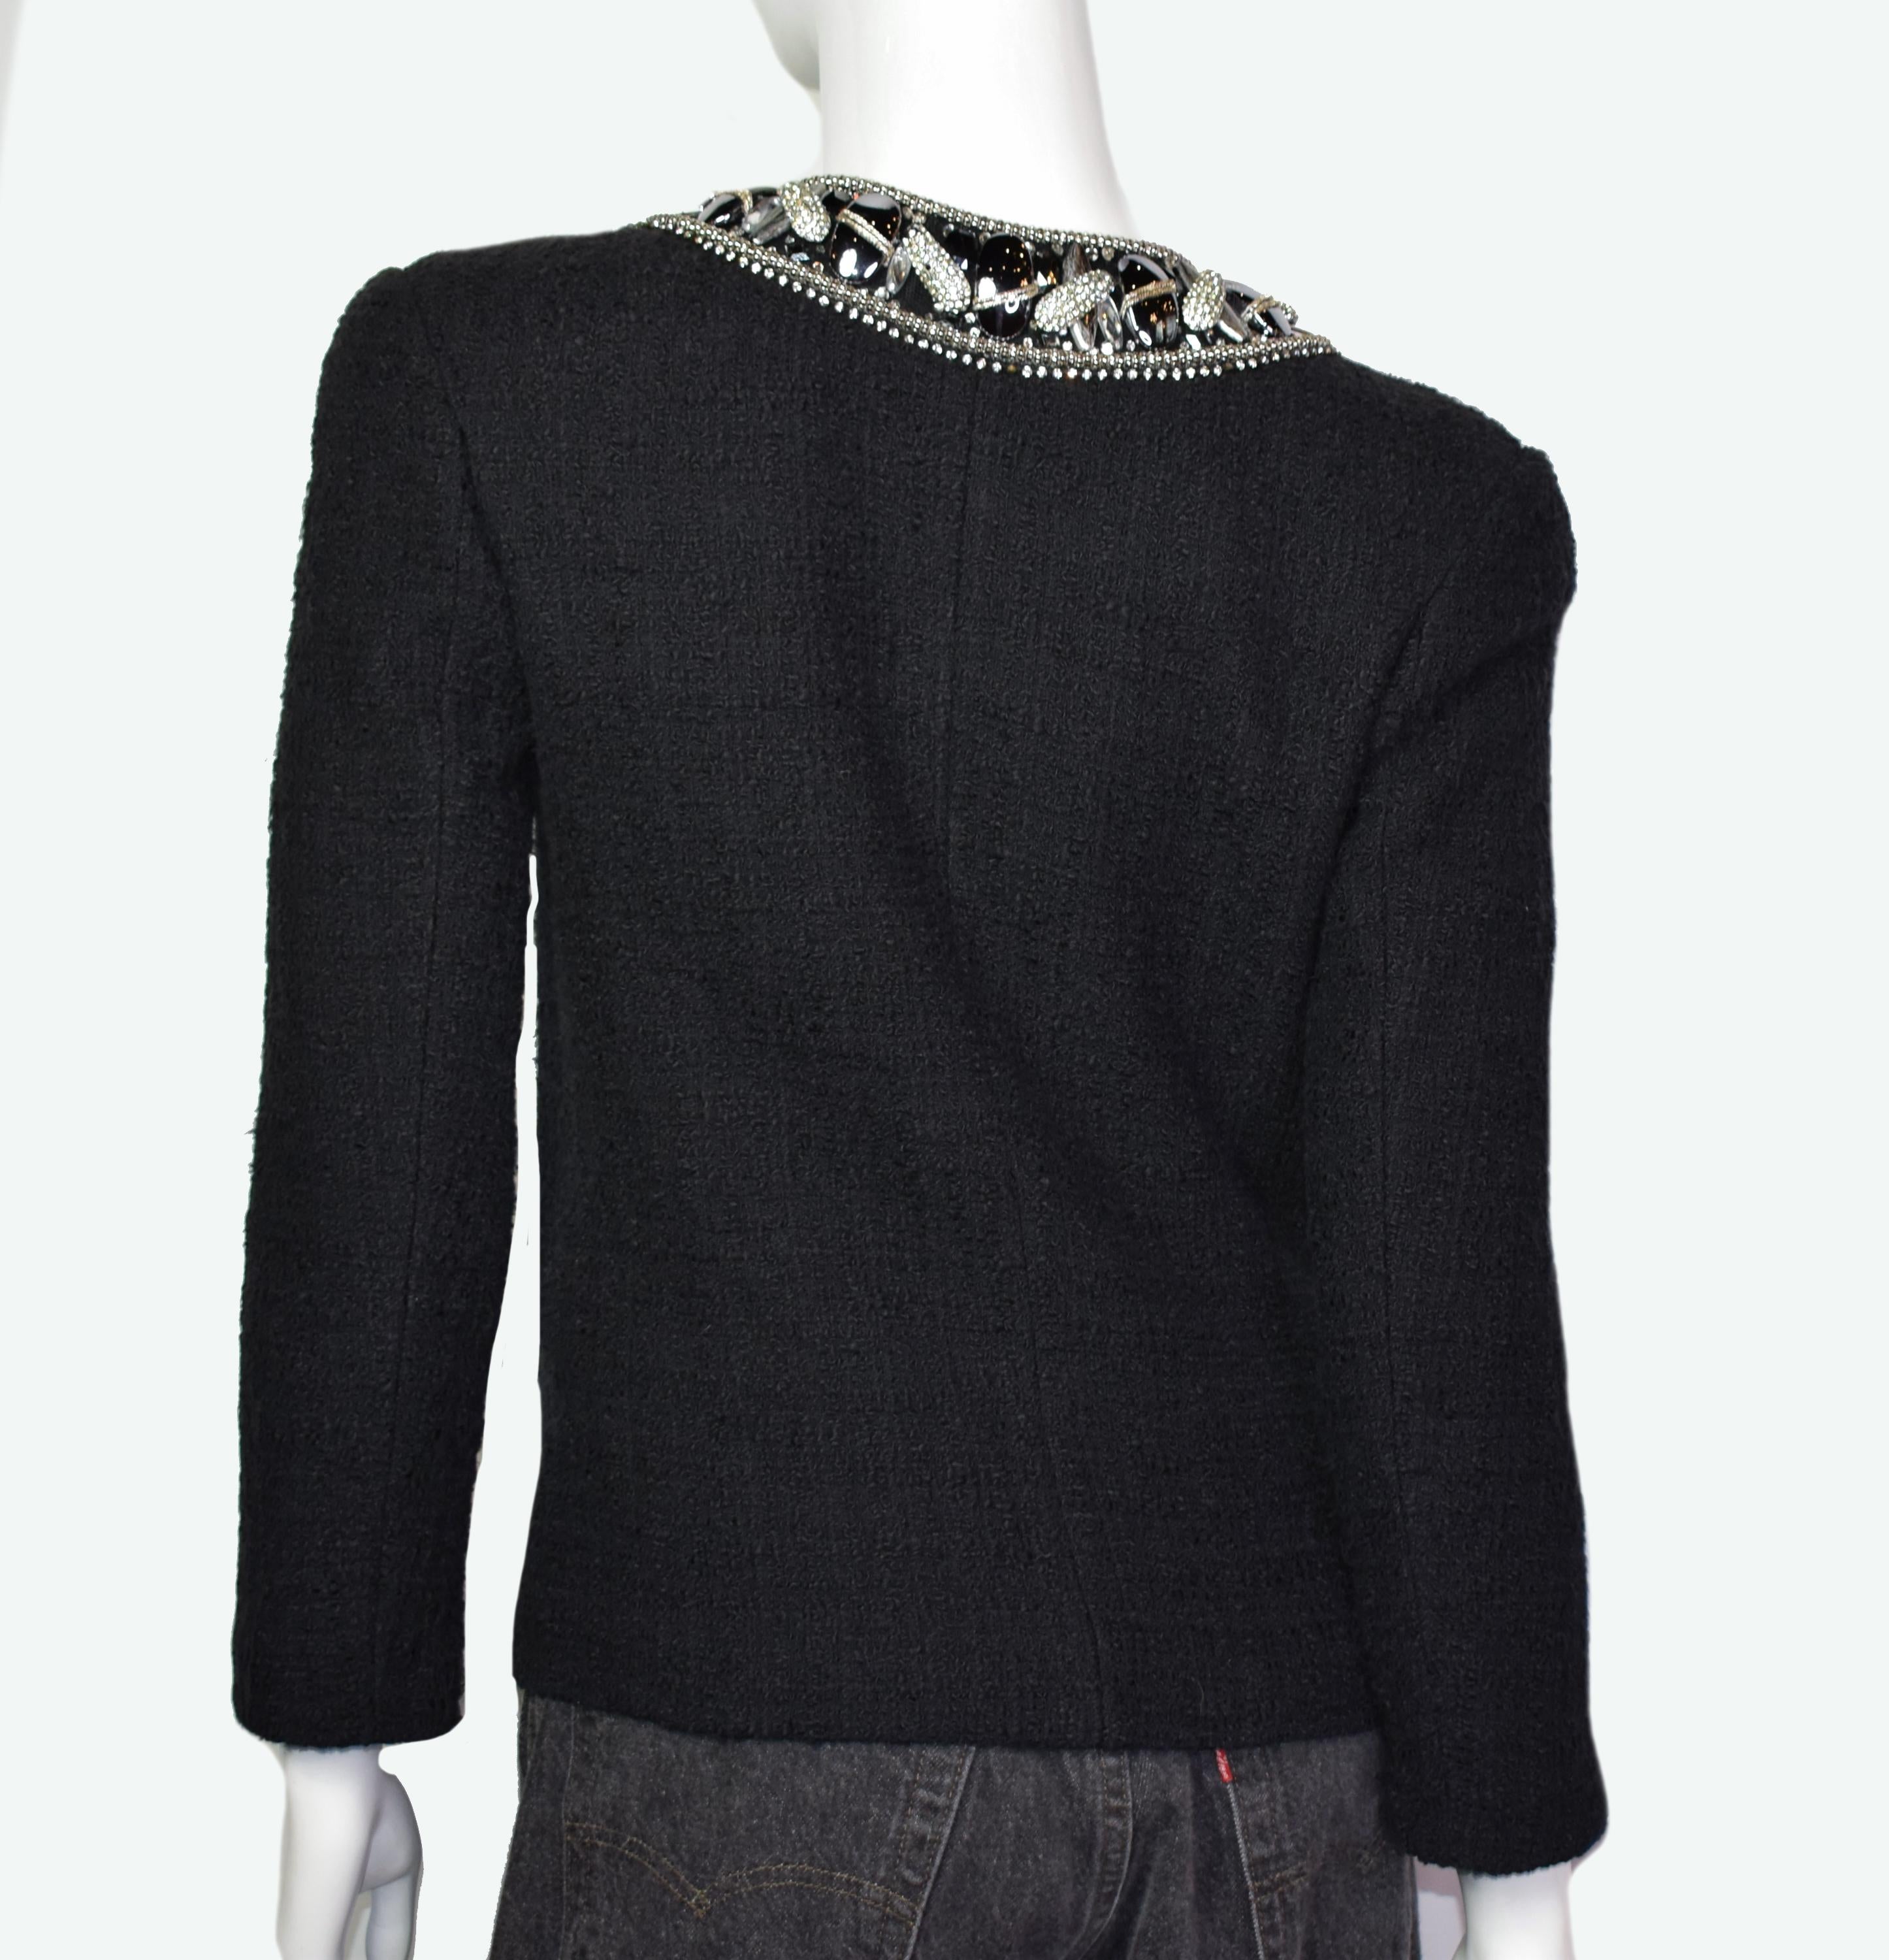 Runway Balmain Crystals And Faux Pearls Embellished Jacket, 2009 Spring RTW  In Good Condition For Sale In New York, NY